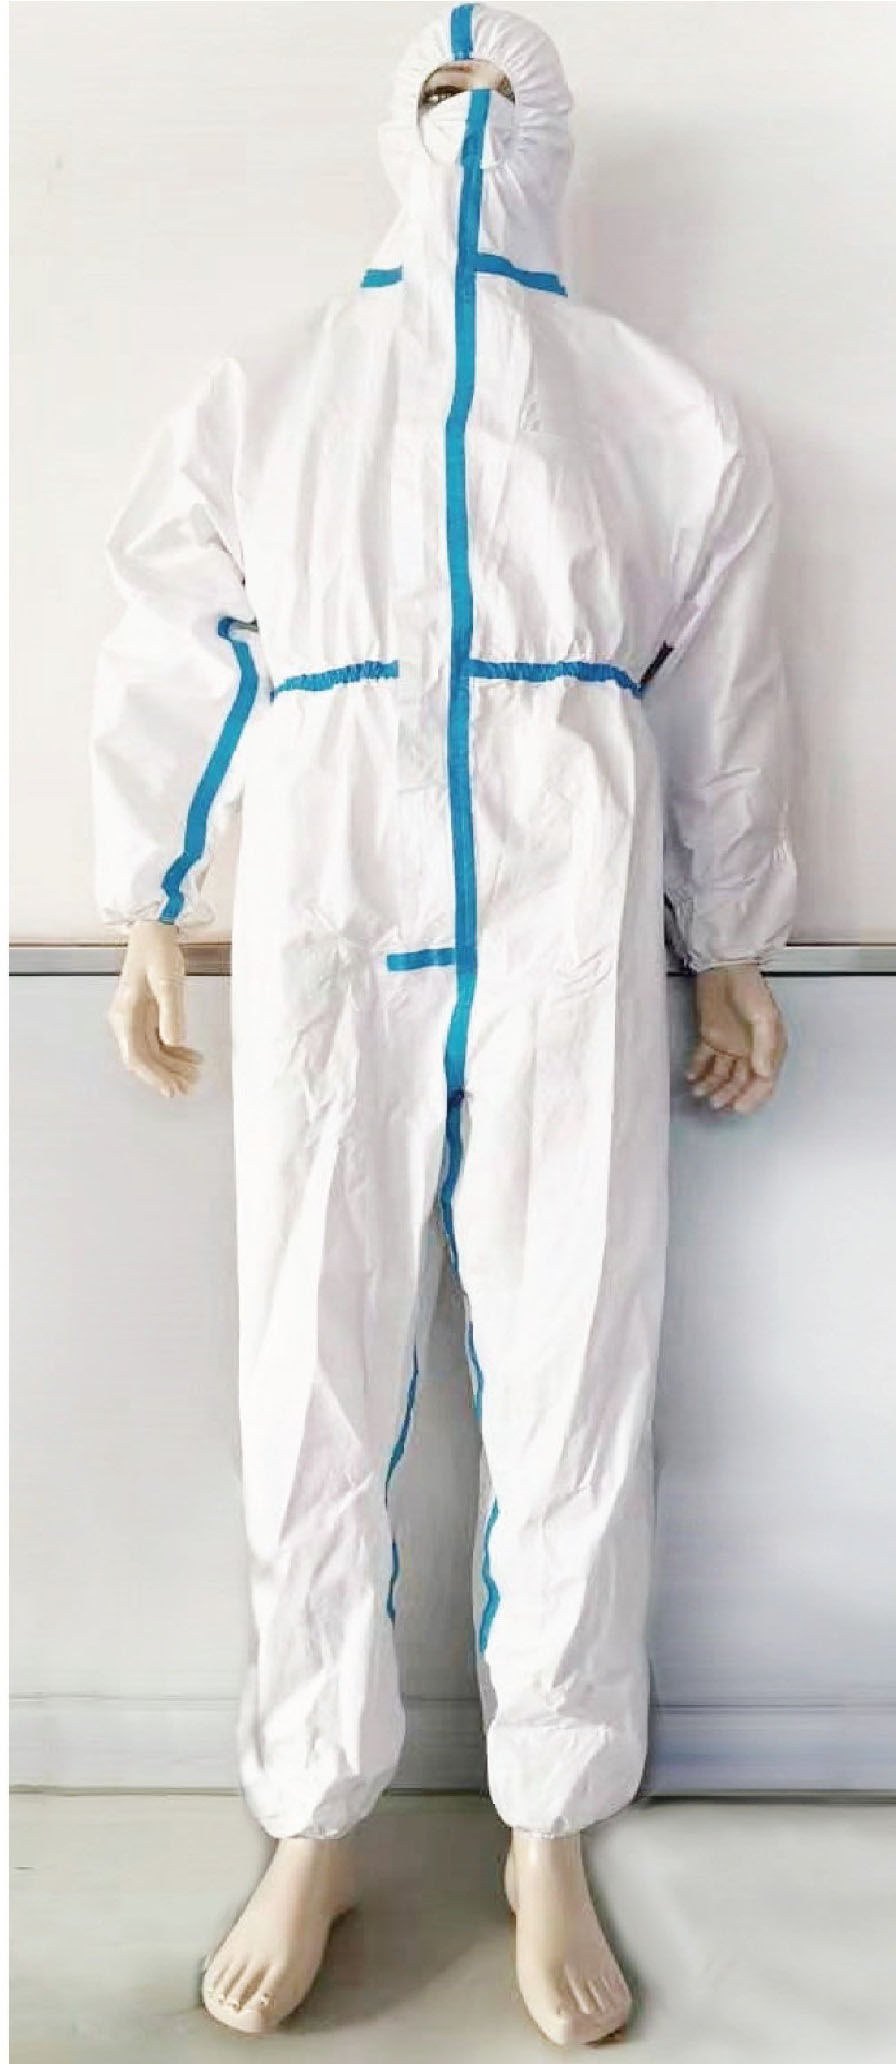 Medical Disposable Protective Clothing (Irradiation Sterilized ...